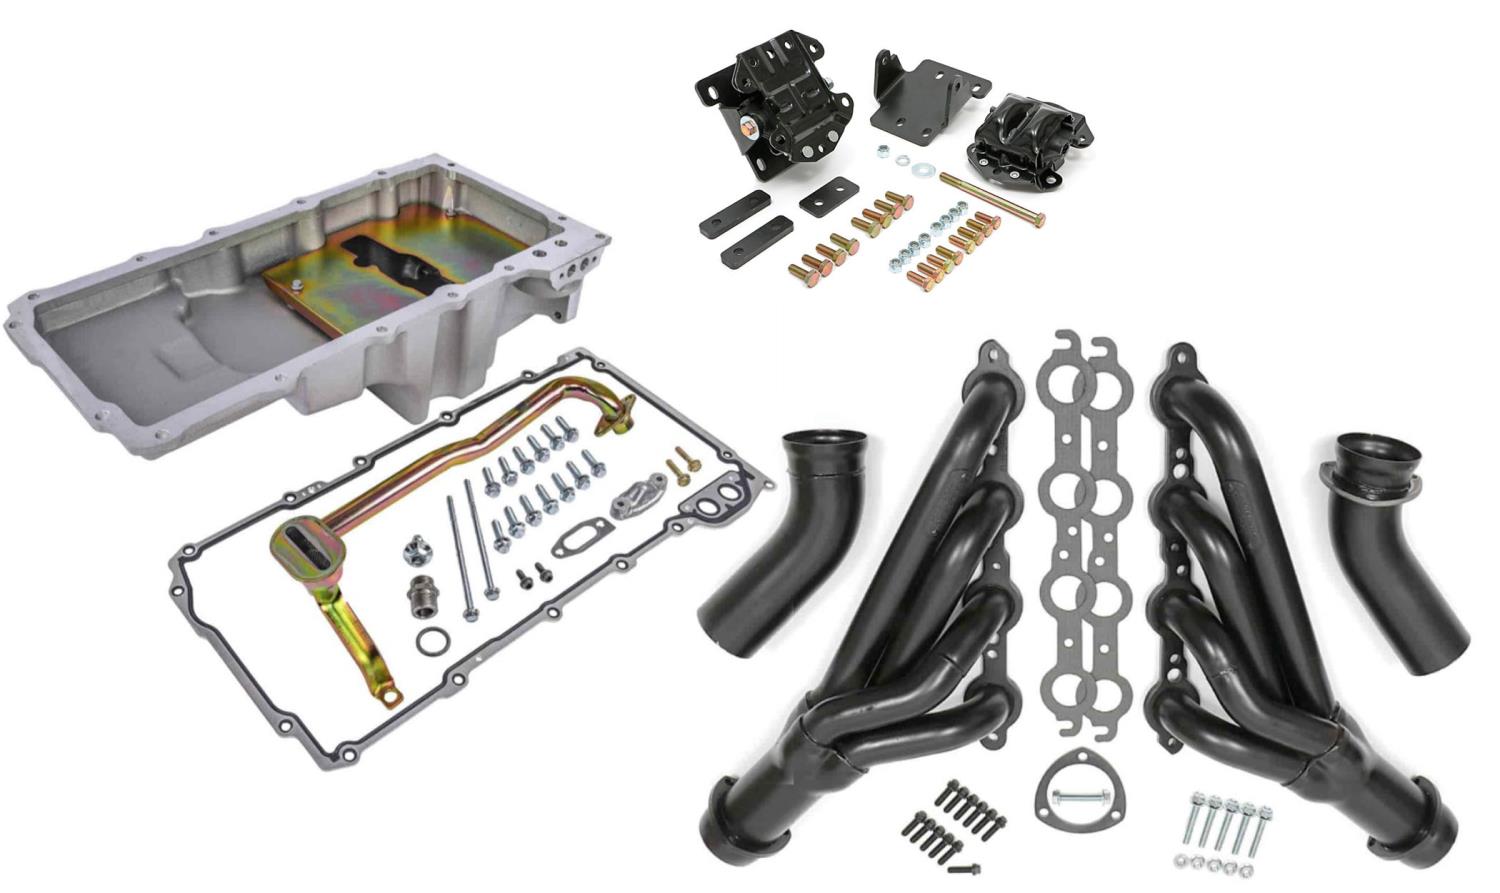 Engine Swap Kit for GM Gen III LS w/4L60E, 4L70E Transmission in Select 1968-1972 Buick, Chevy, Oldsmobile, Pontiac Cars